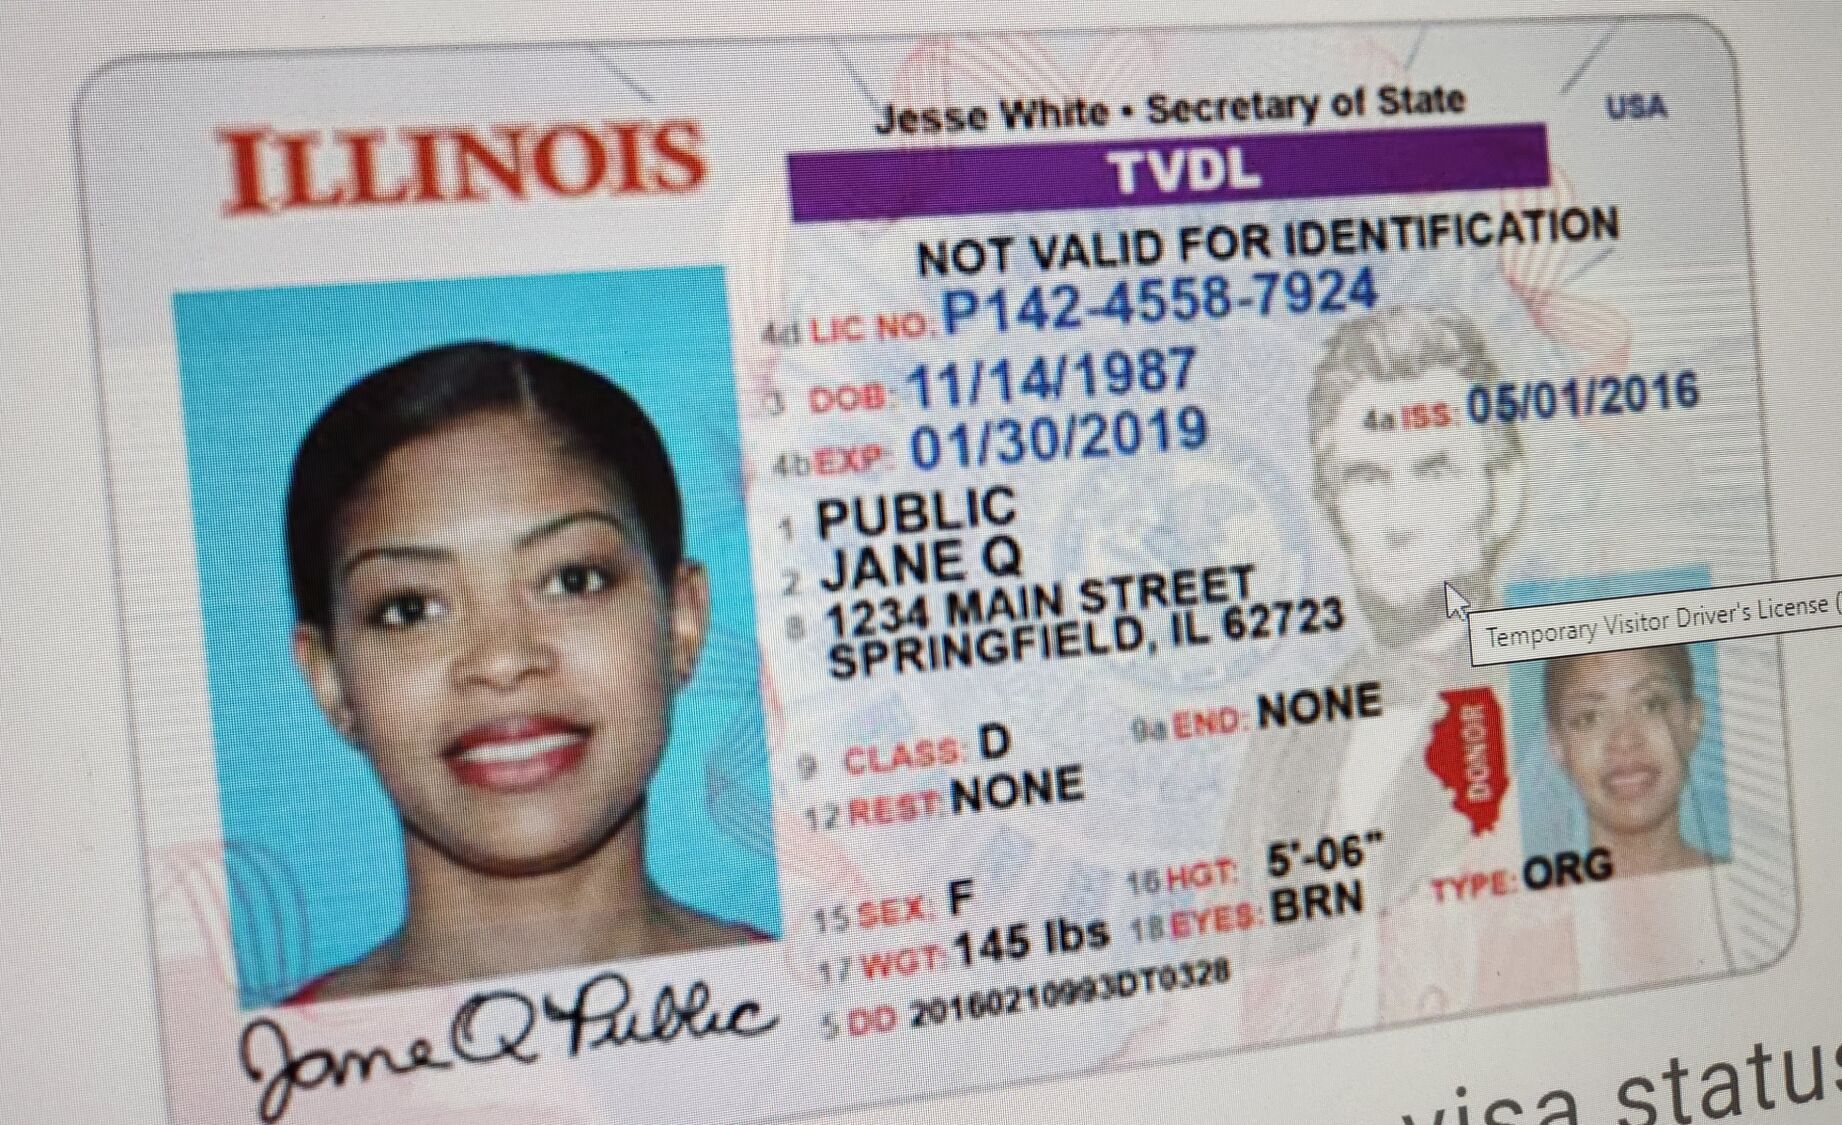 obtaining a driver's license in illinois